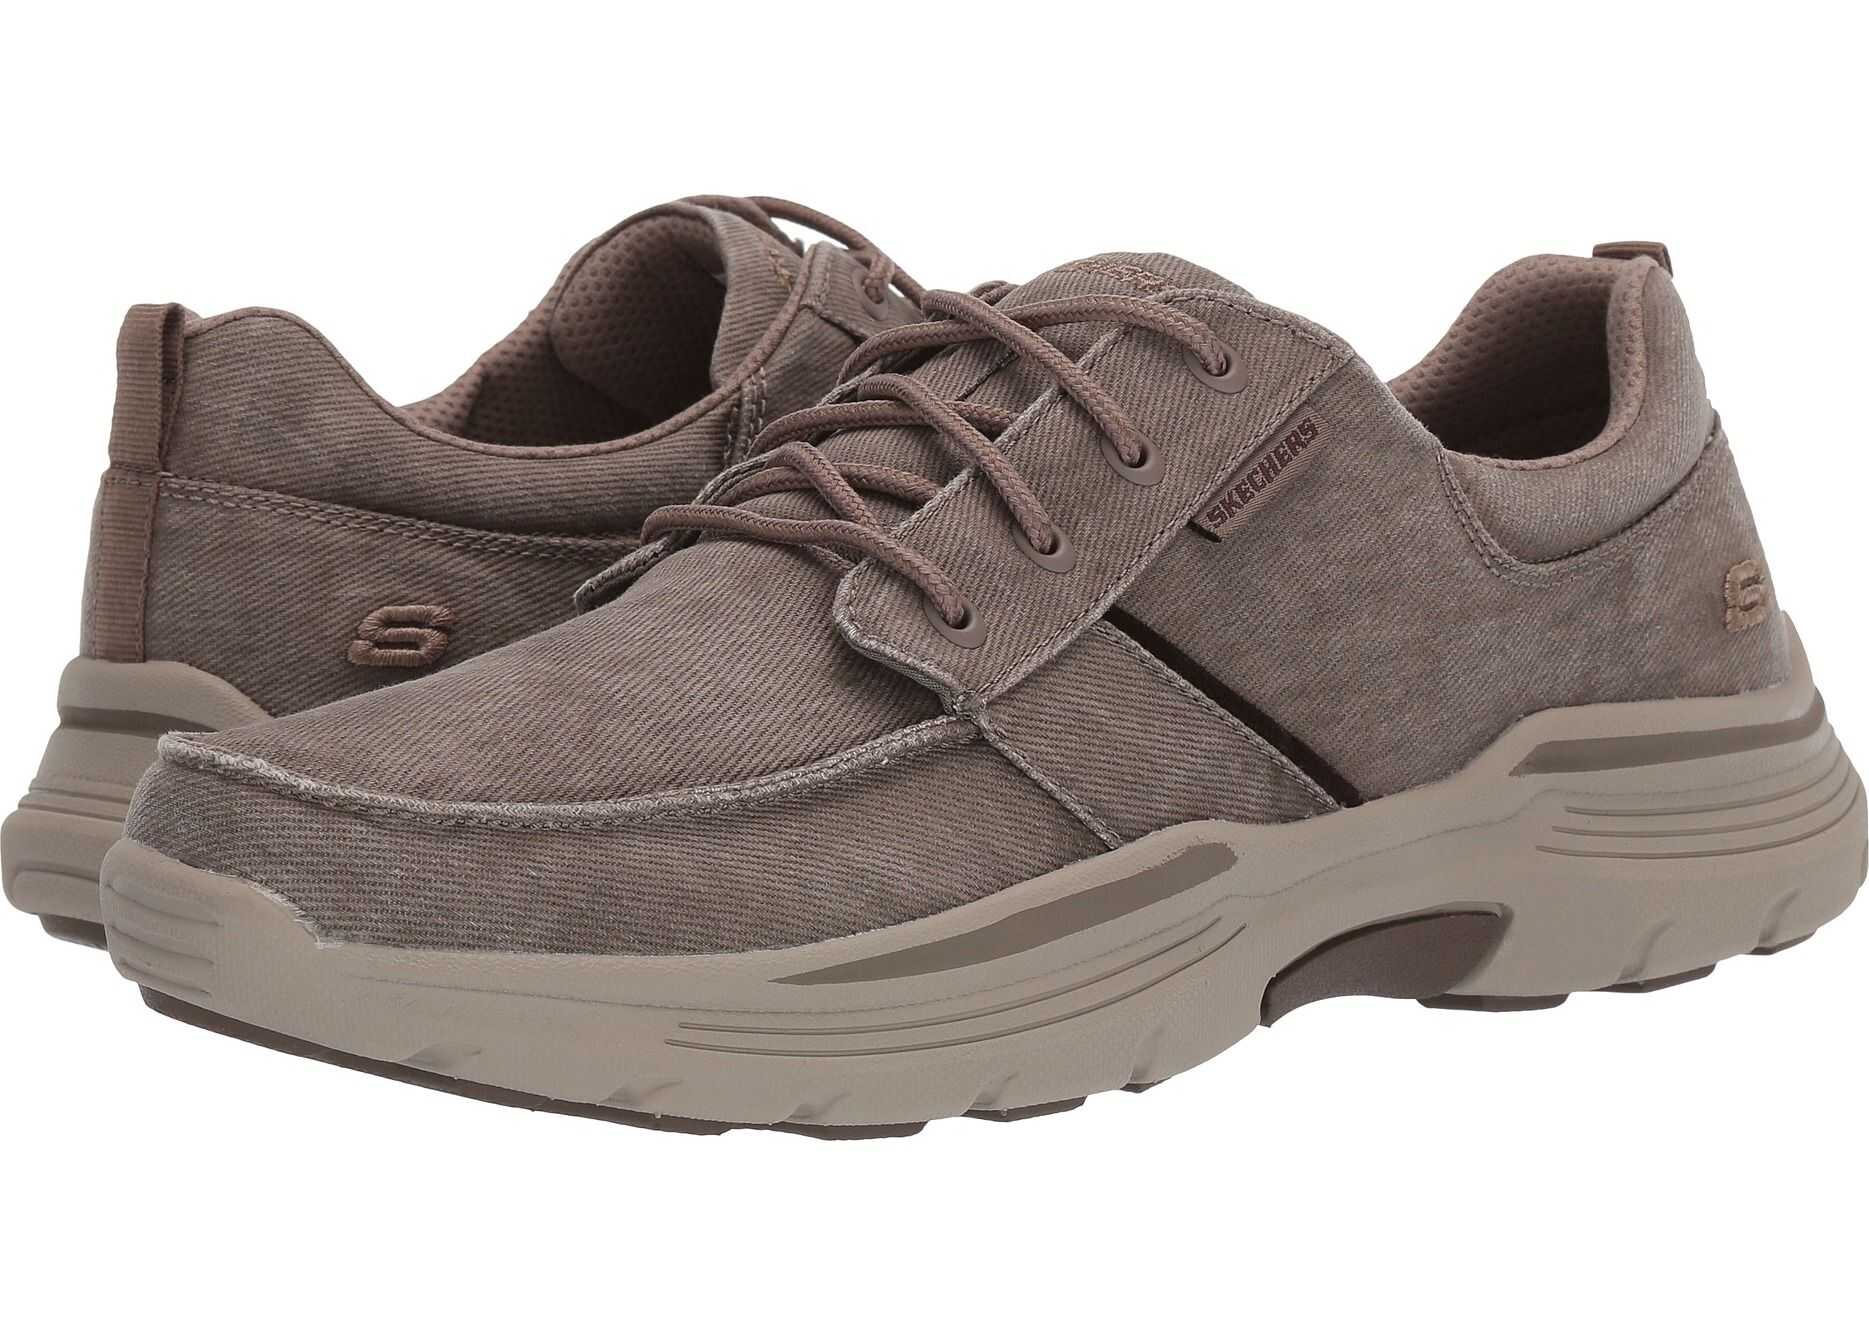 SKECHERS Expended Bermo Beige